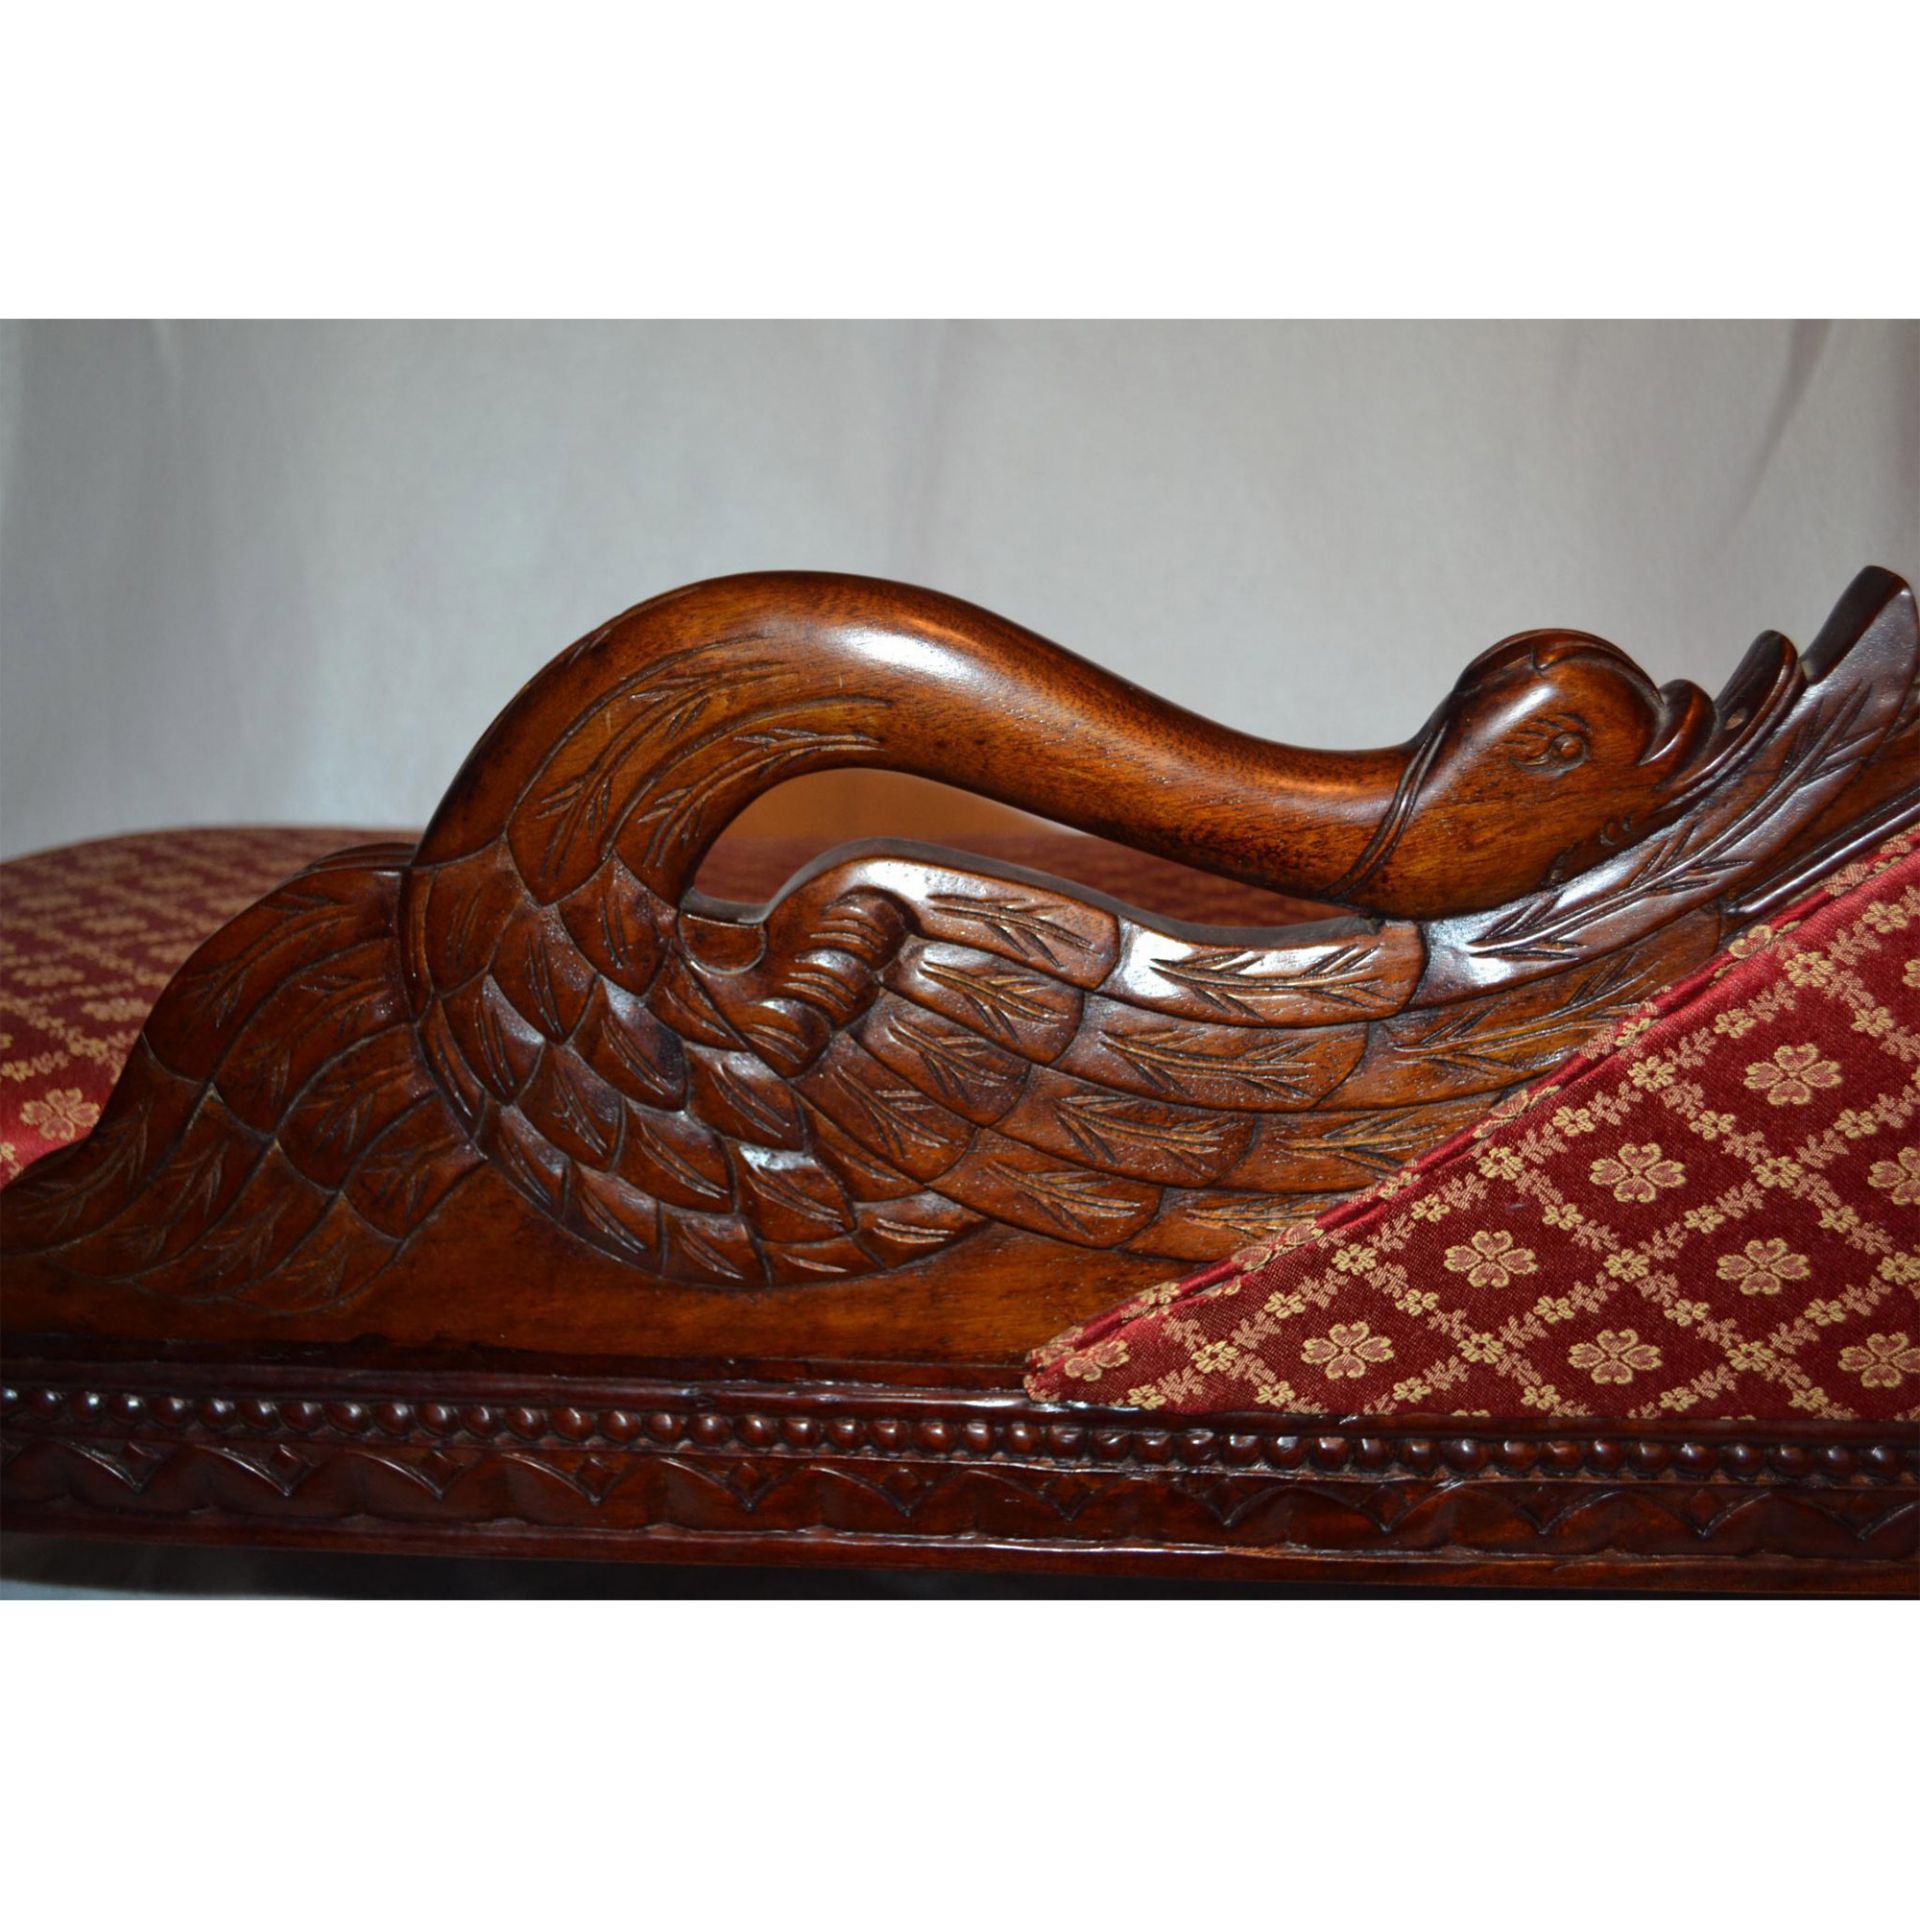 Miniature European Mahogany Hand Carved And Crafted Swan Sofa, Upholstered In Red/Gold Pattern Damas - Bild 4 aus 5